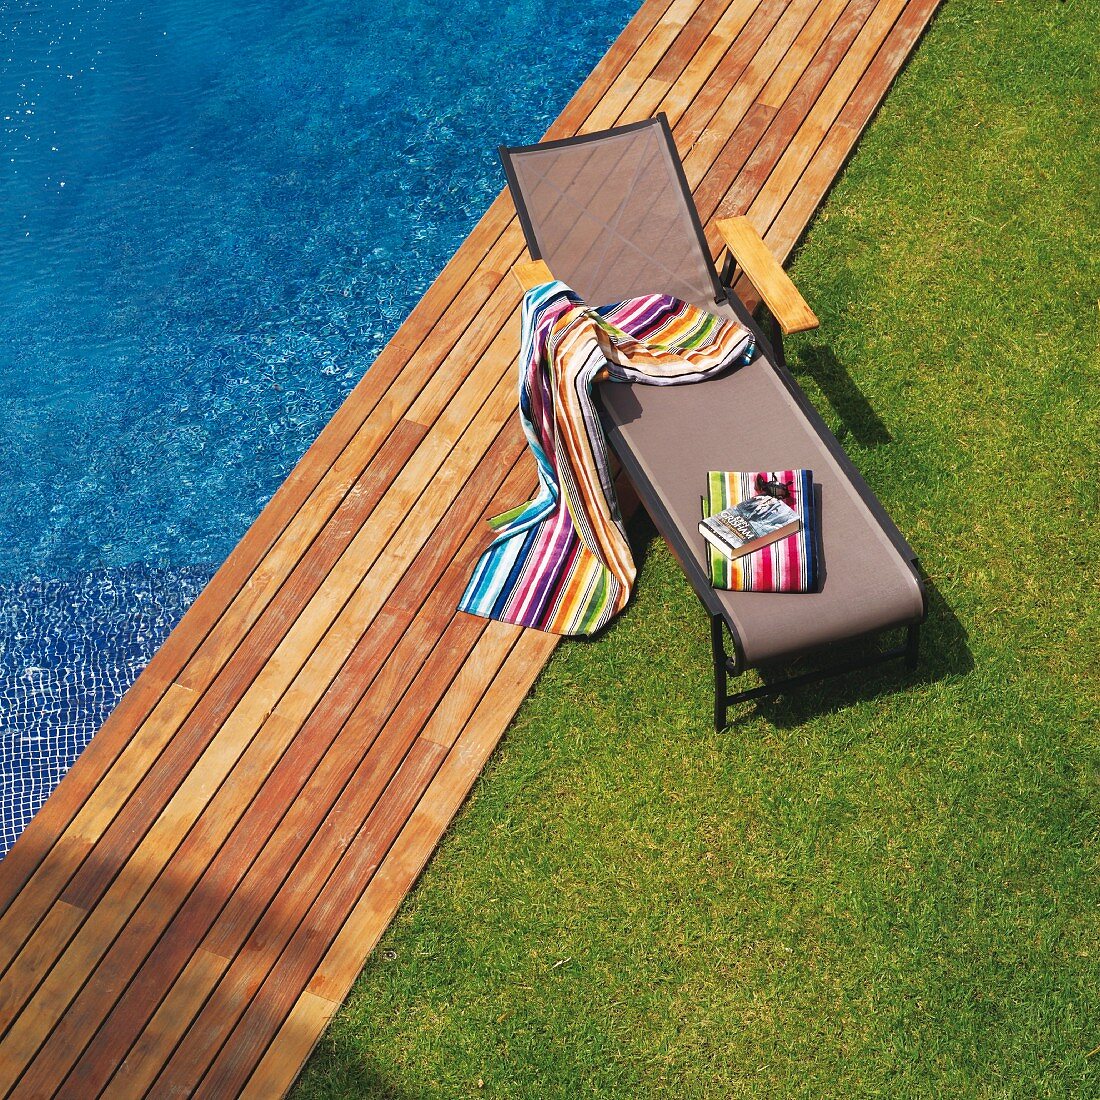 Lawn and wooden deck edging pool; brightly striped towels on modern sun lounger